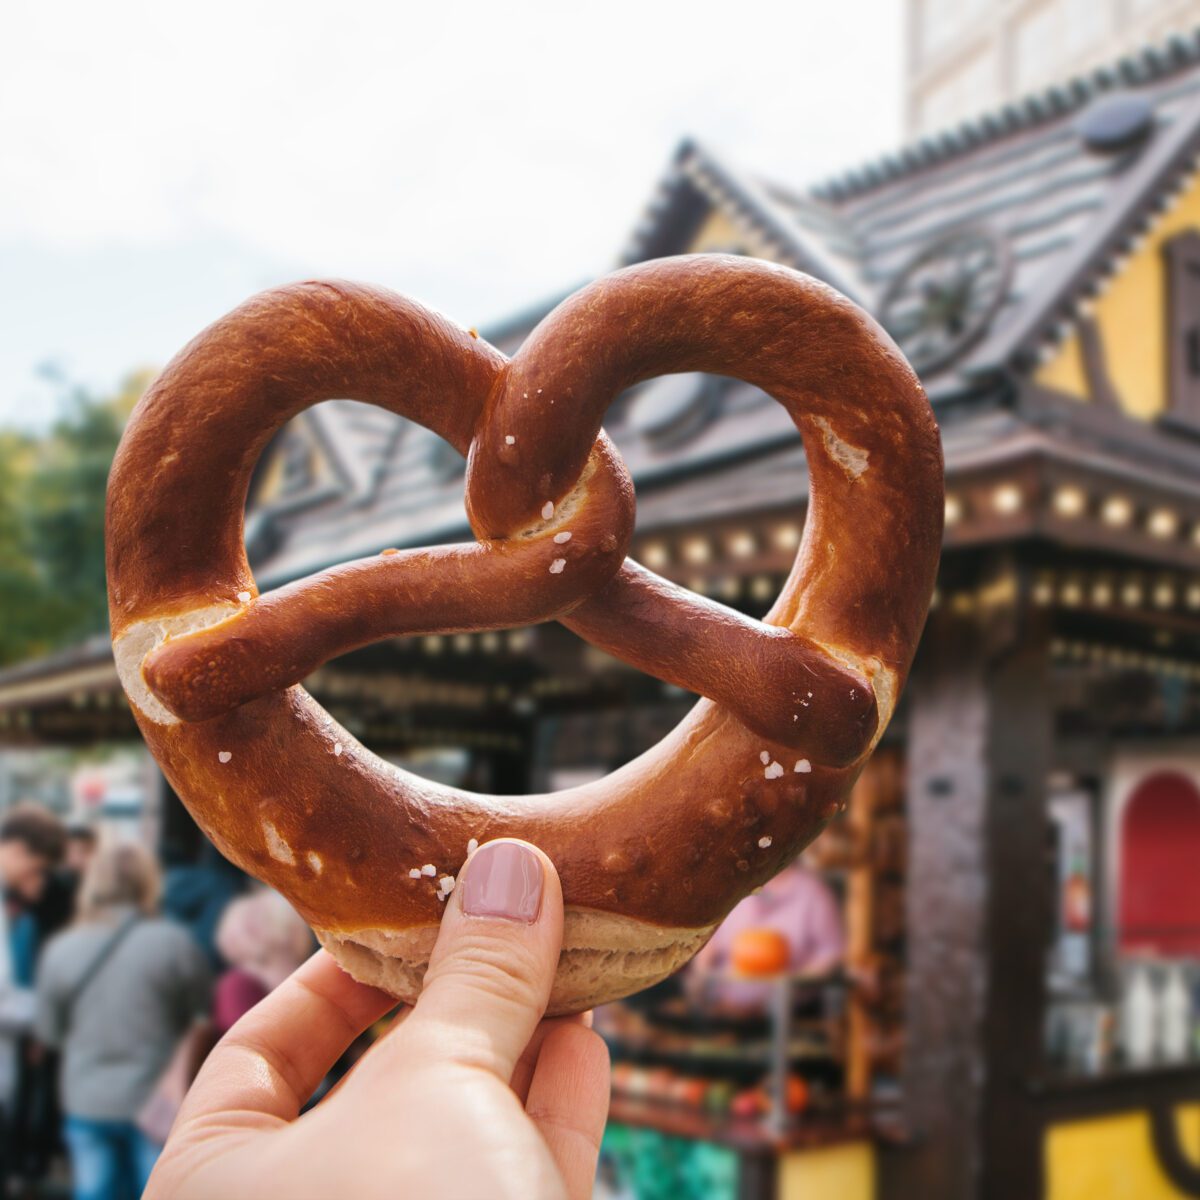 A girl or a young woman is holding a traditional German pretzel in the street. Oktoberfest festival in the background.